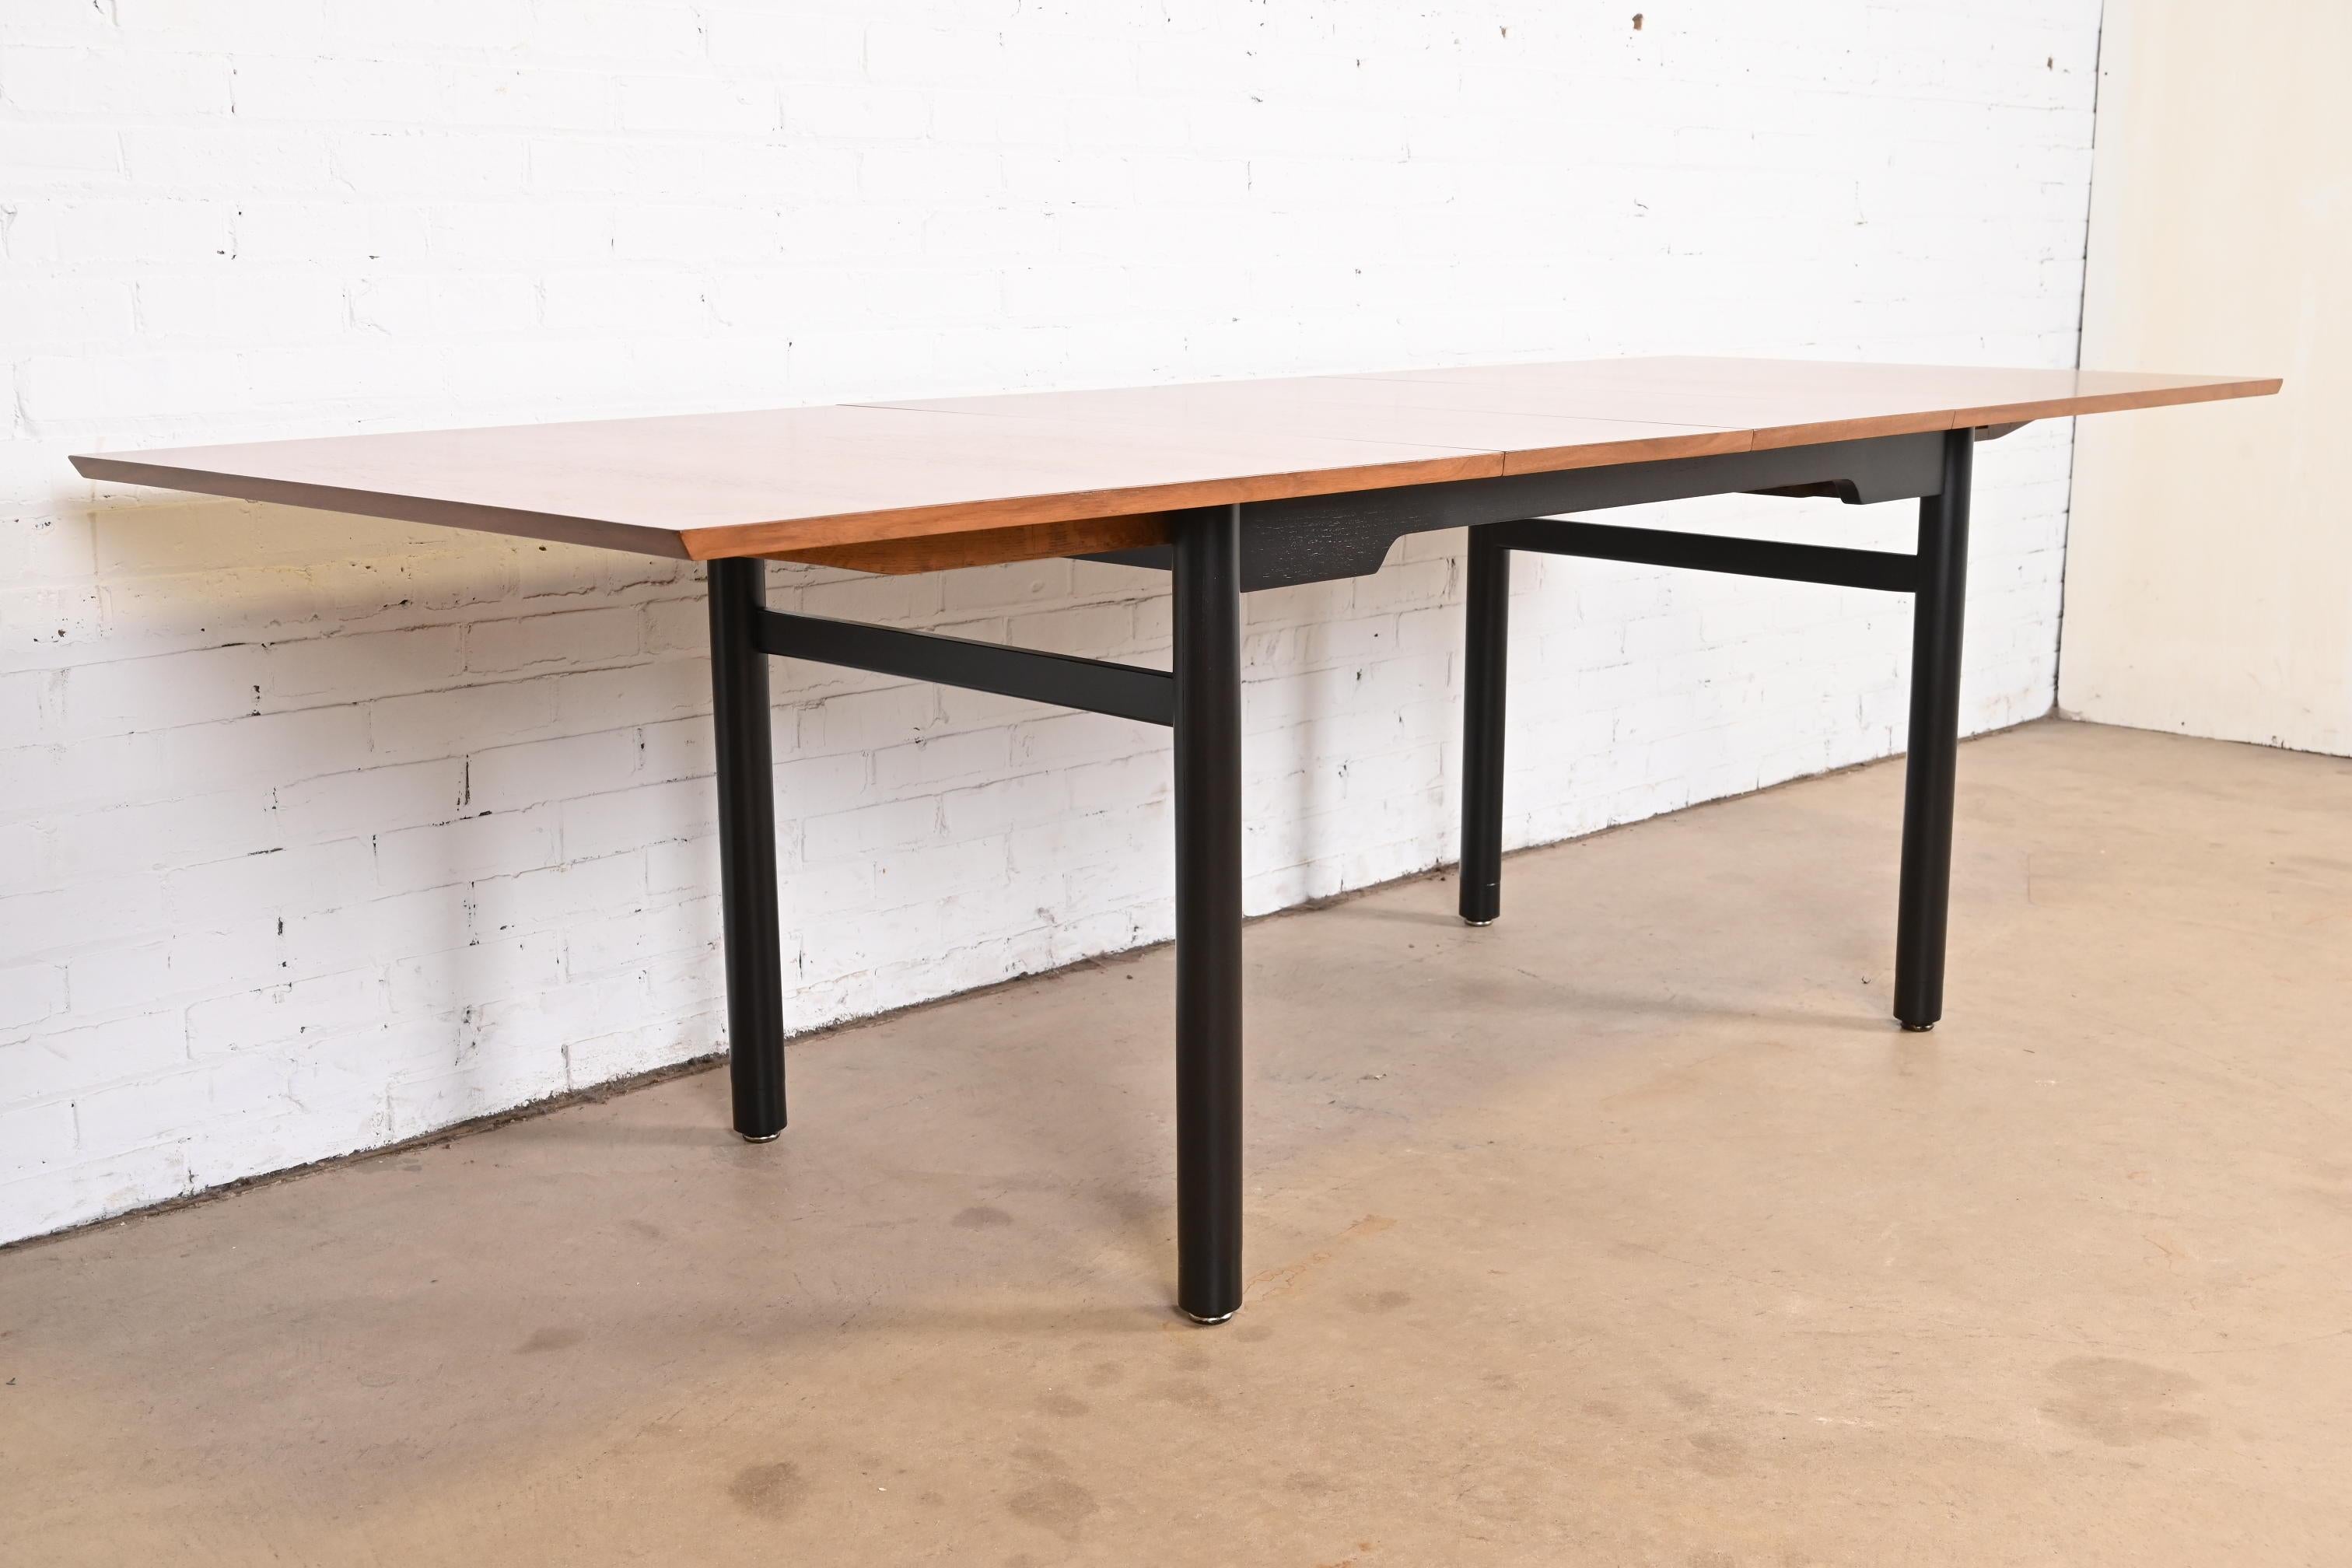 Mid-20th Century Edward Wormley for Dunbar Walnut and Ebonized Dining Table, Newly Refinished For Sale